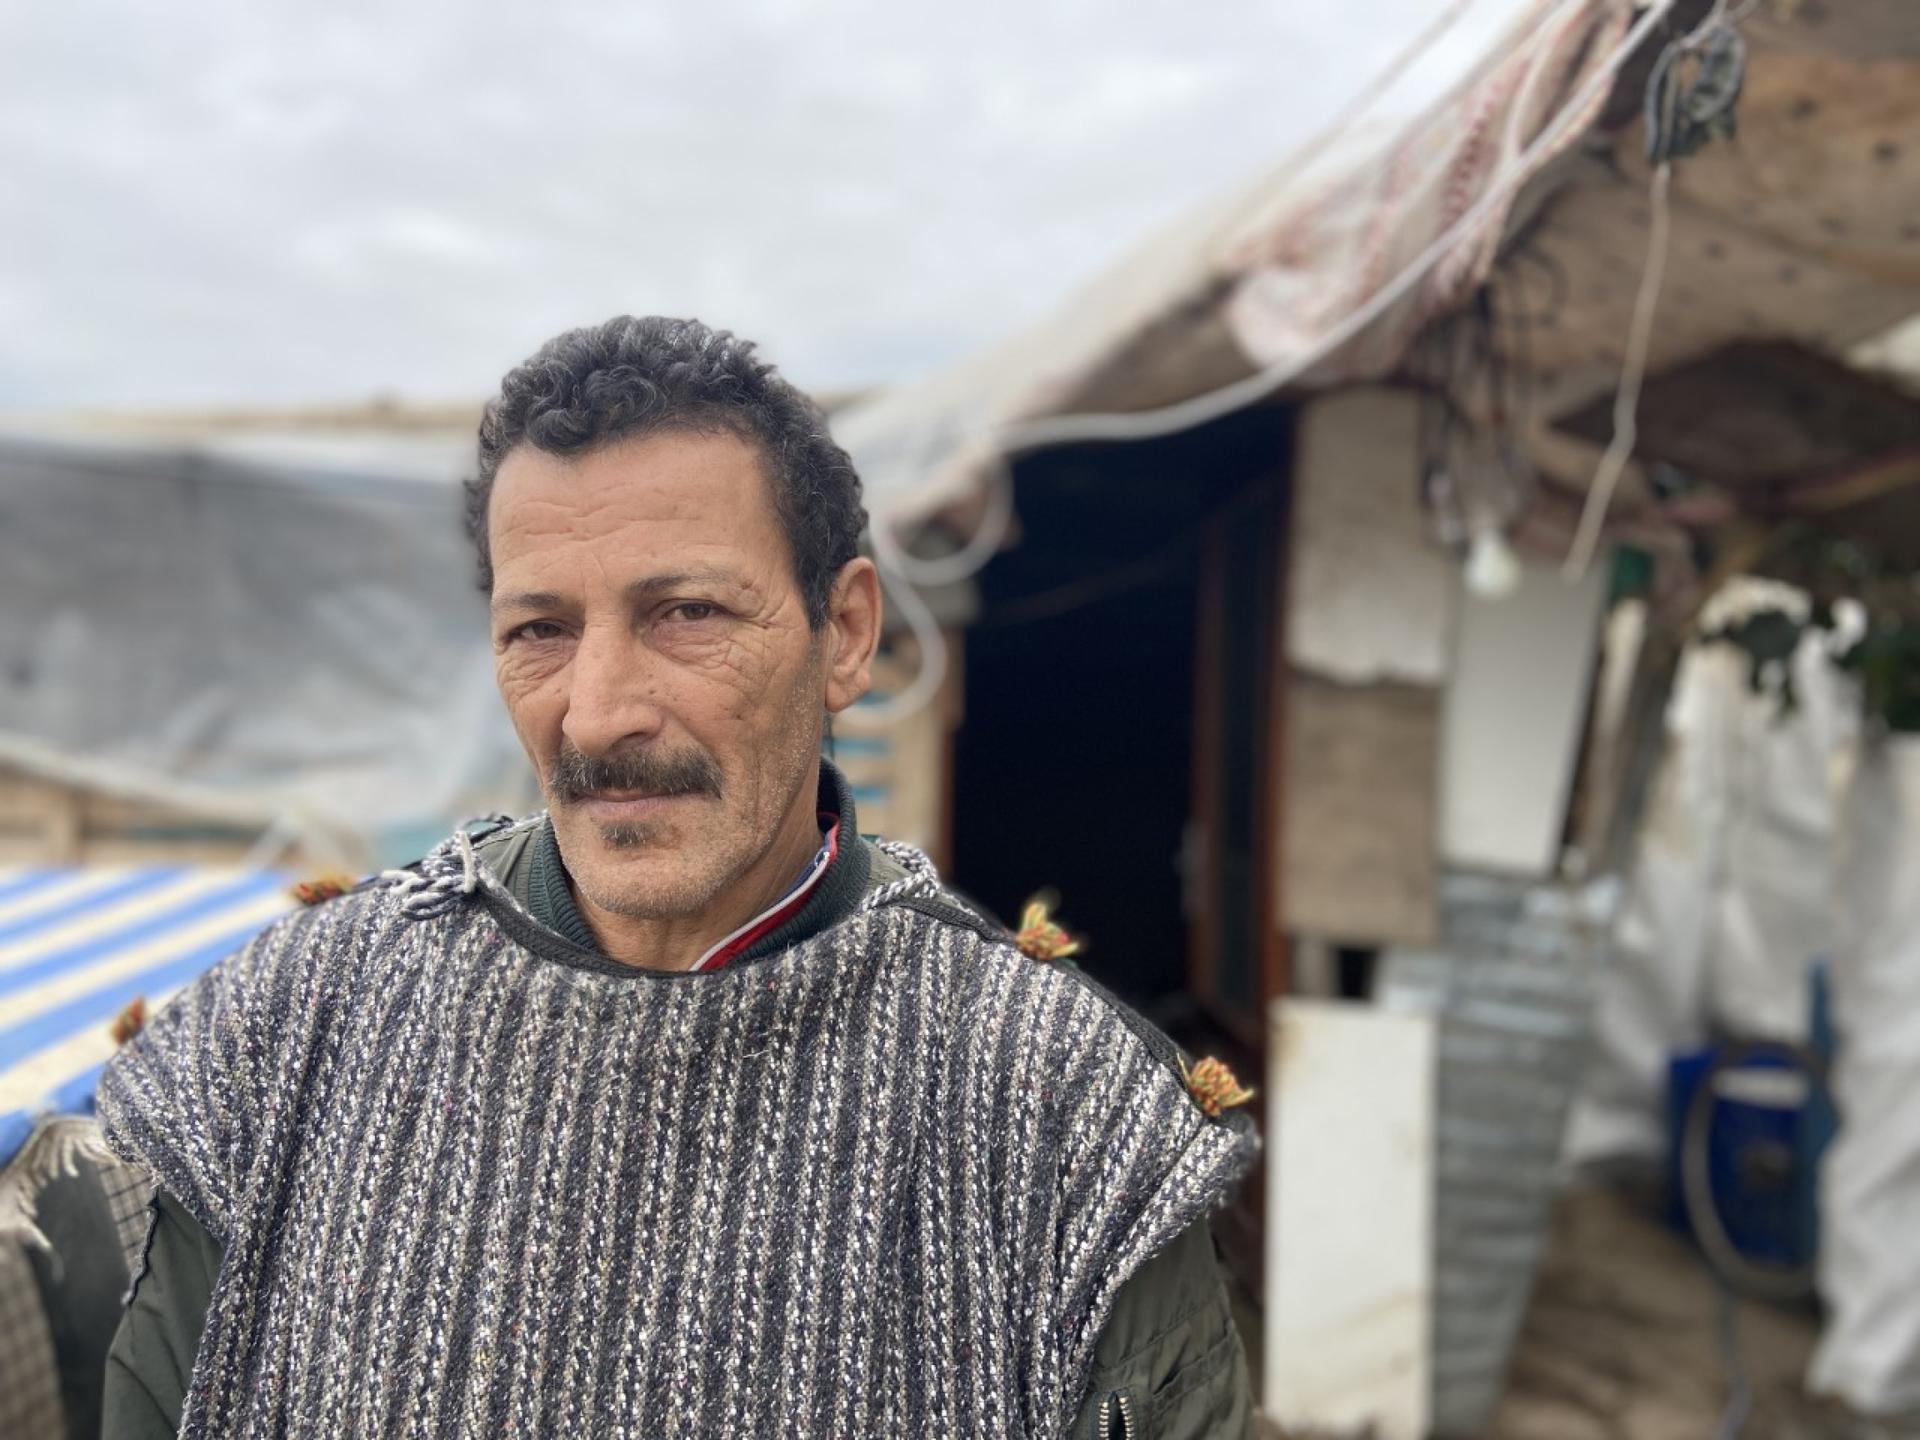 Farmhand Abdellah Skifi at his home in one of the many shantytowns in Almería, Spain.